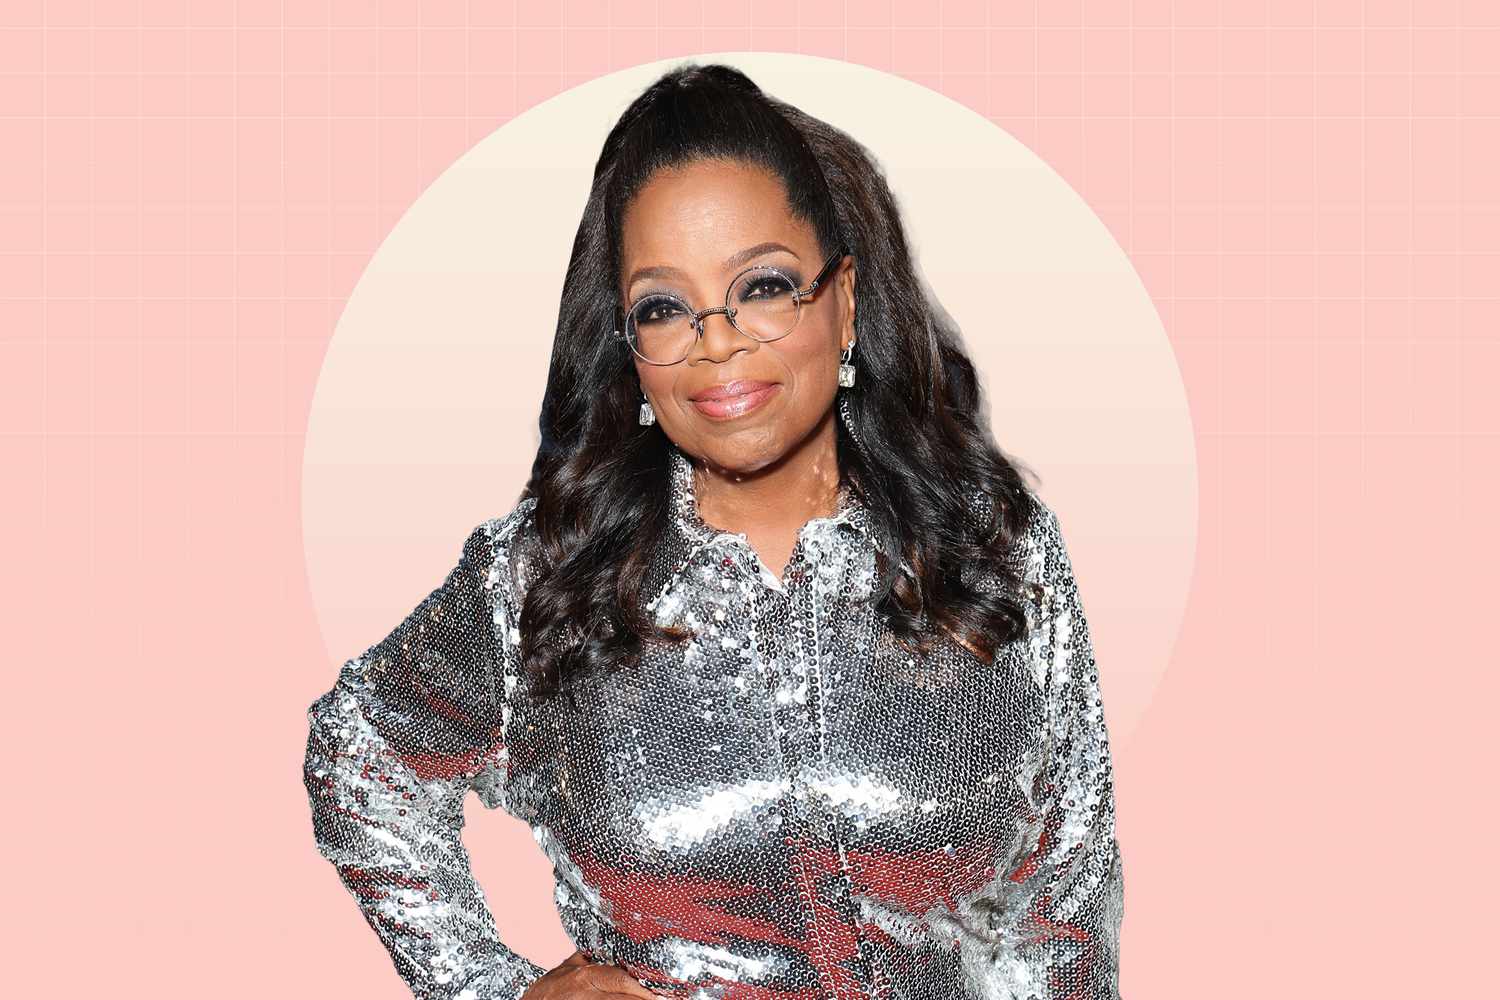 Oprah Winfrey, 69, flaunts weight loss in purple gown at LA event